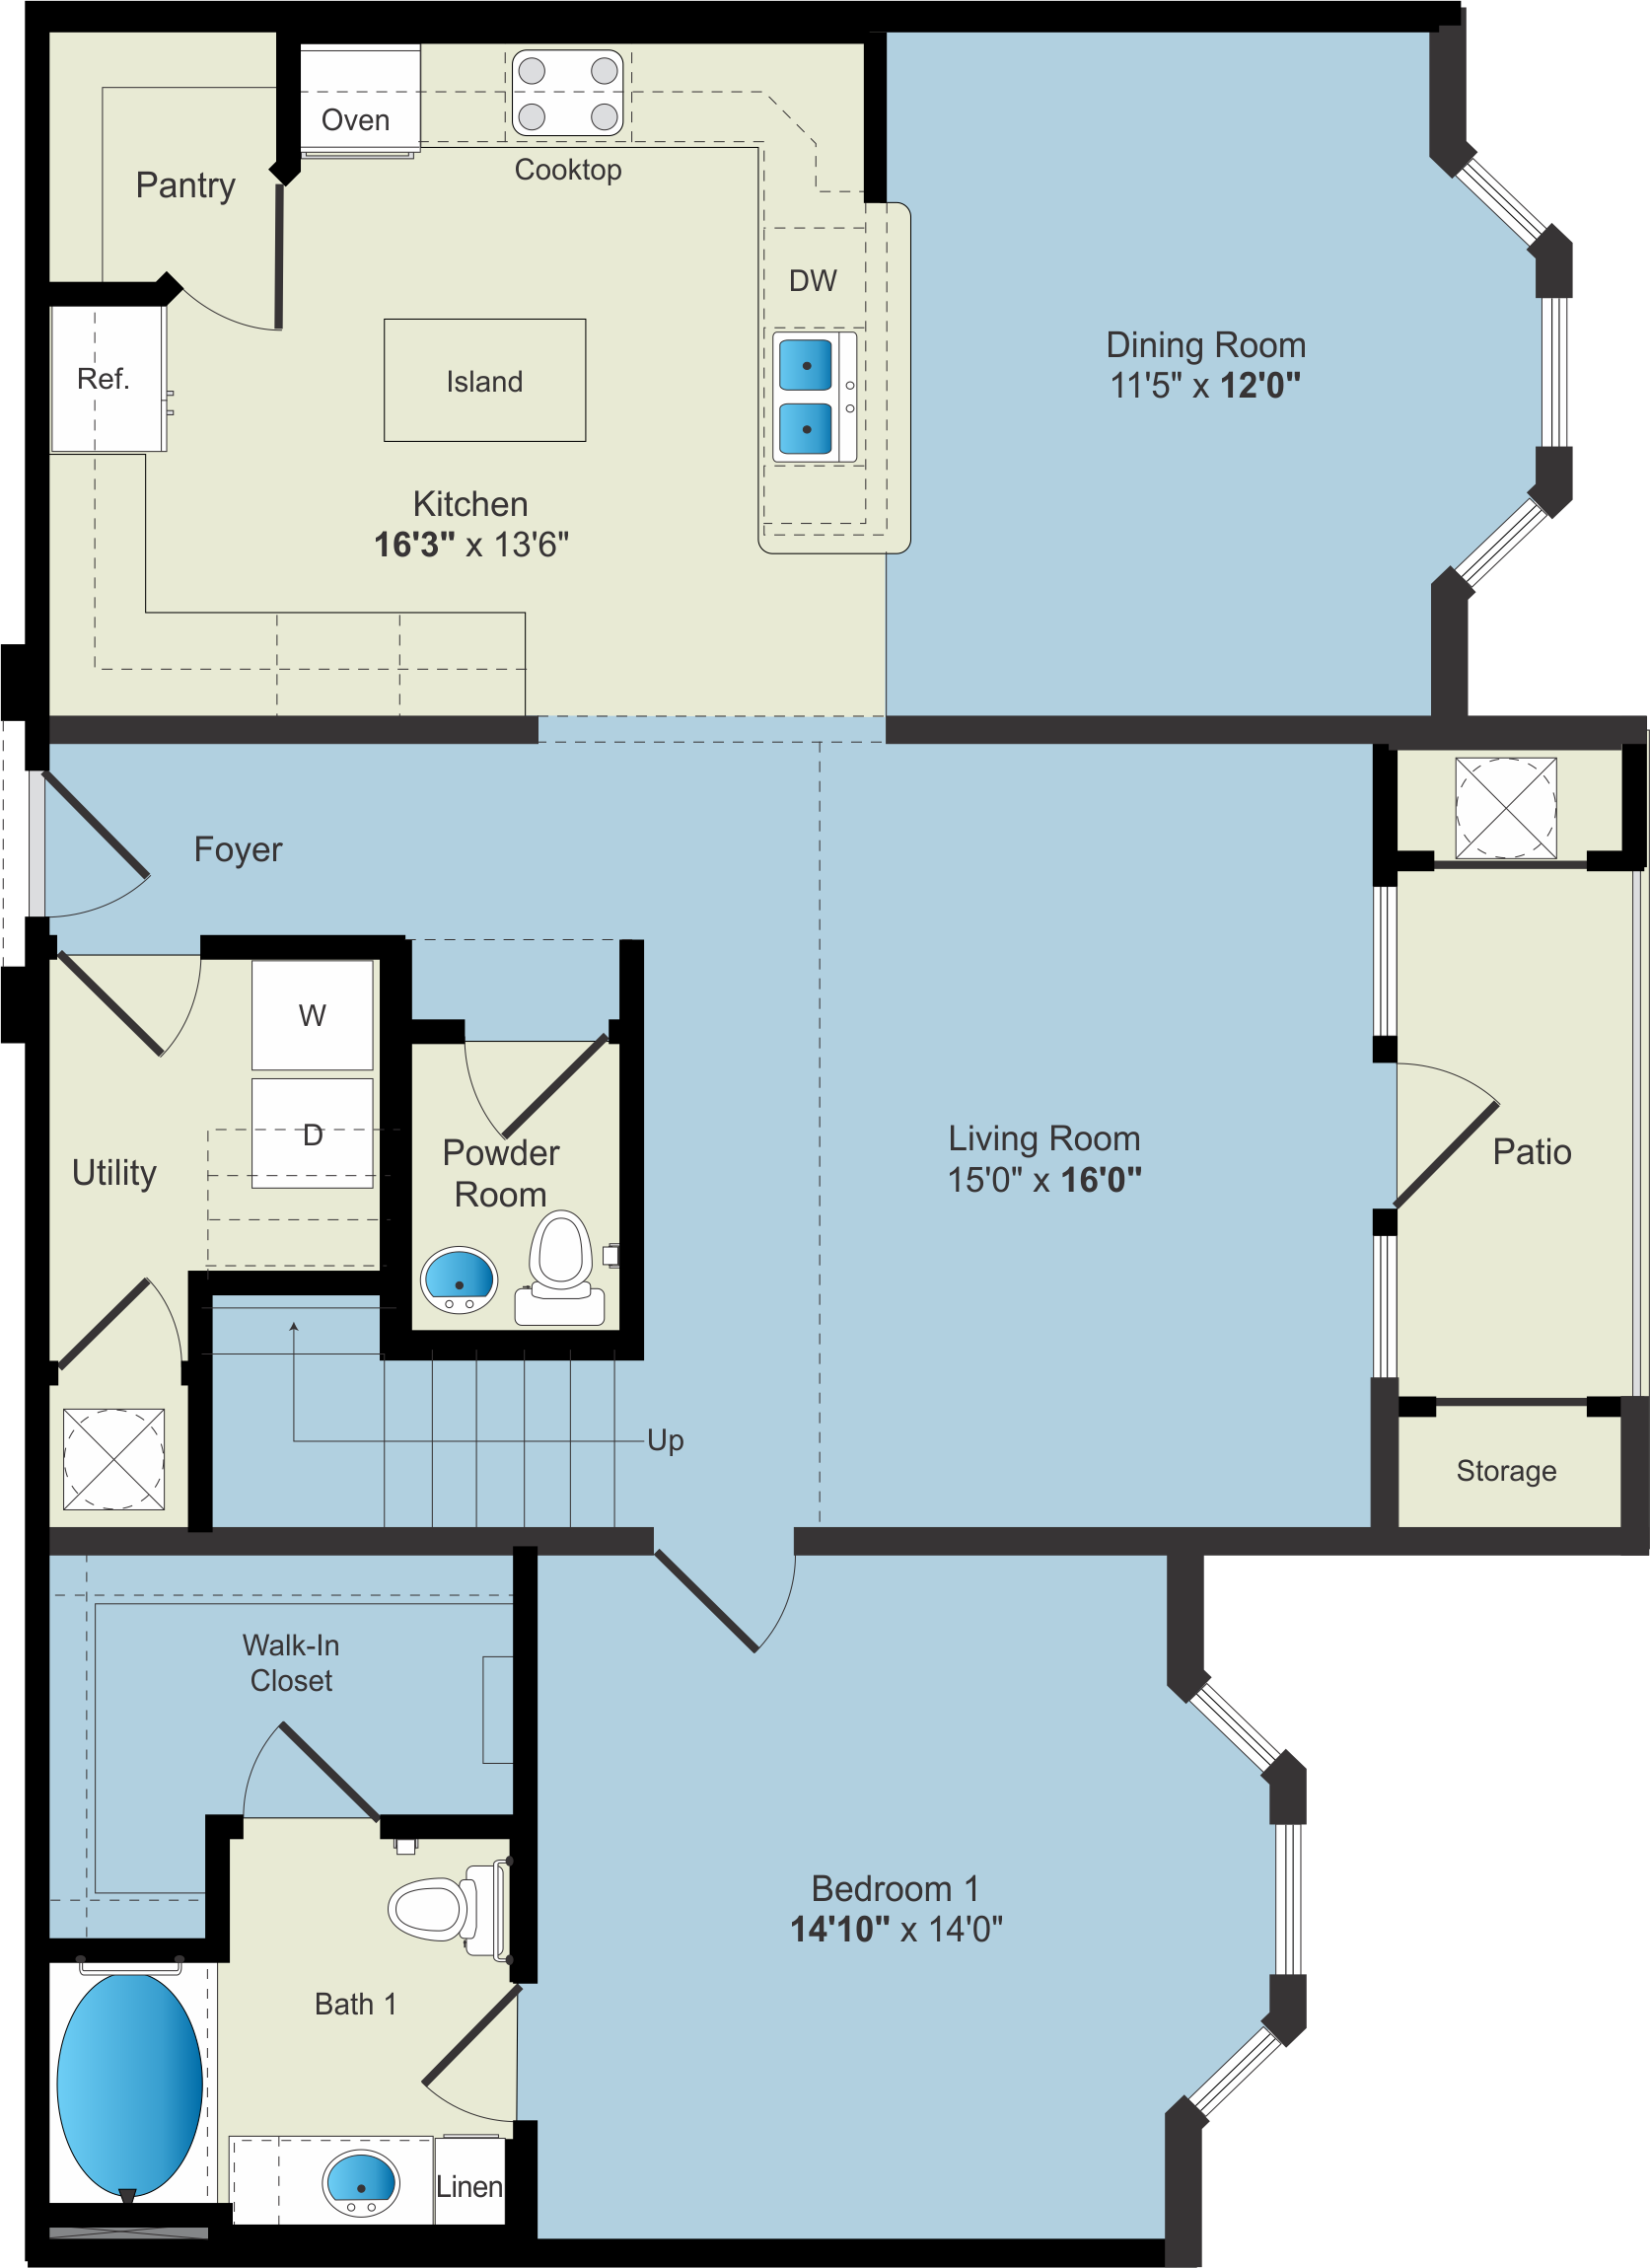 A floor plan for an Apartment Rentals with two bedrooms.